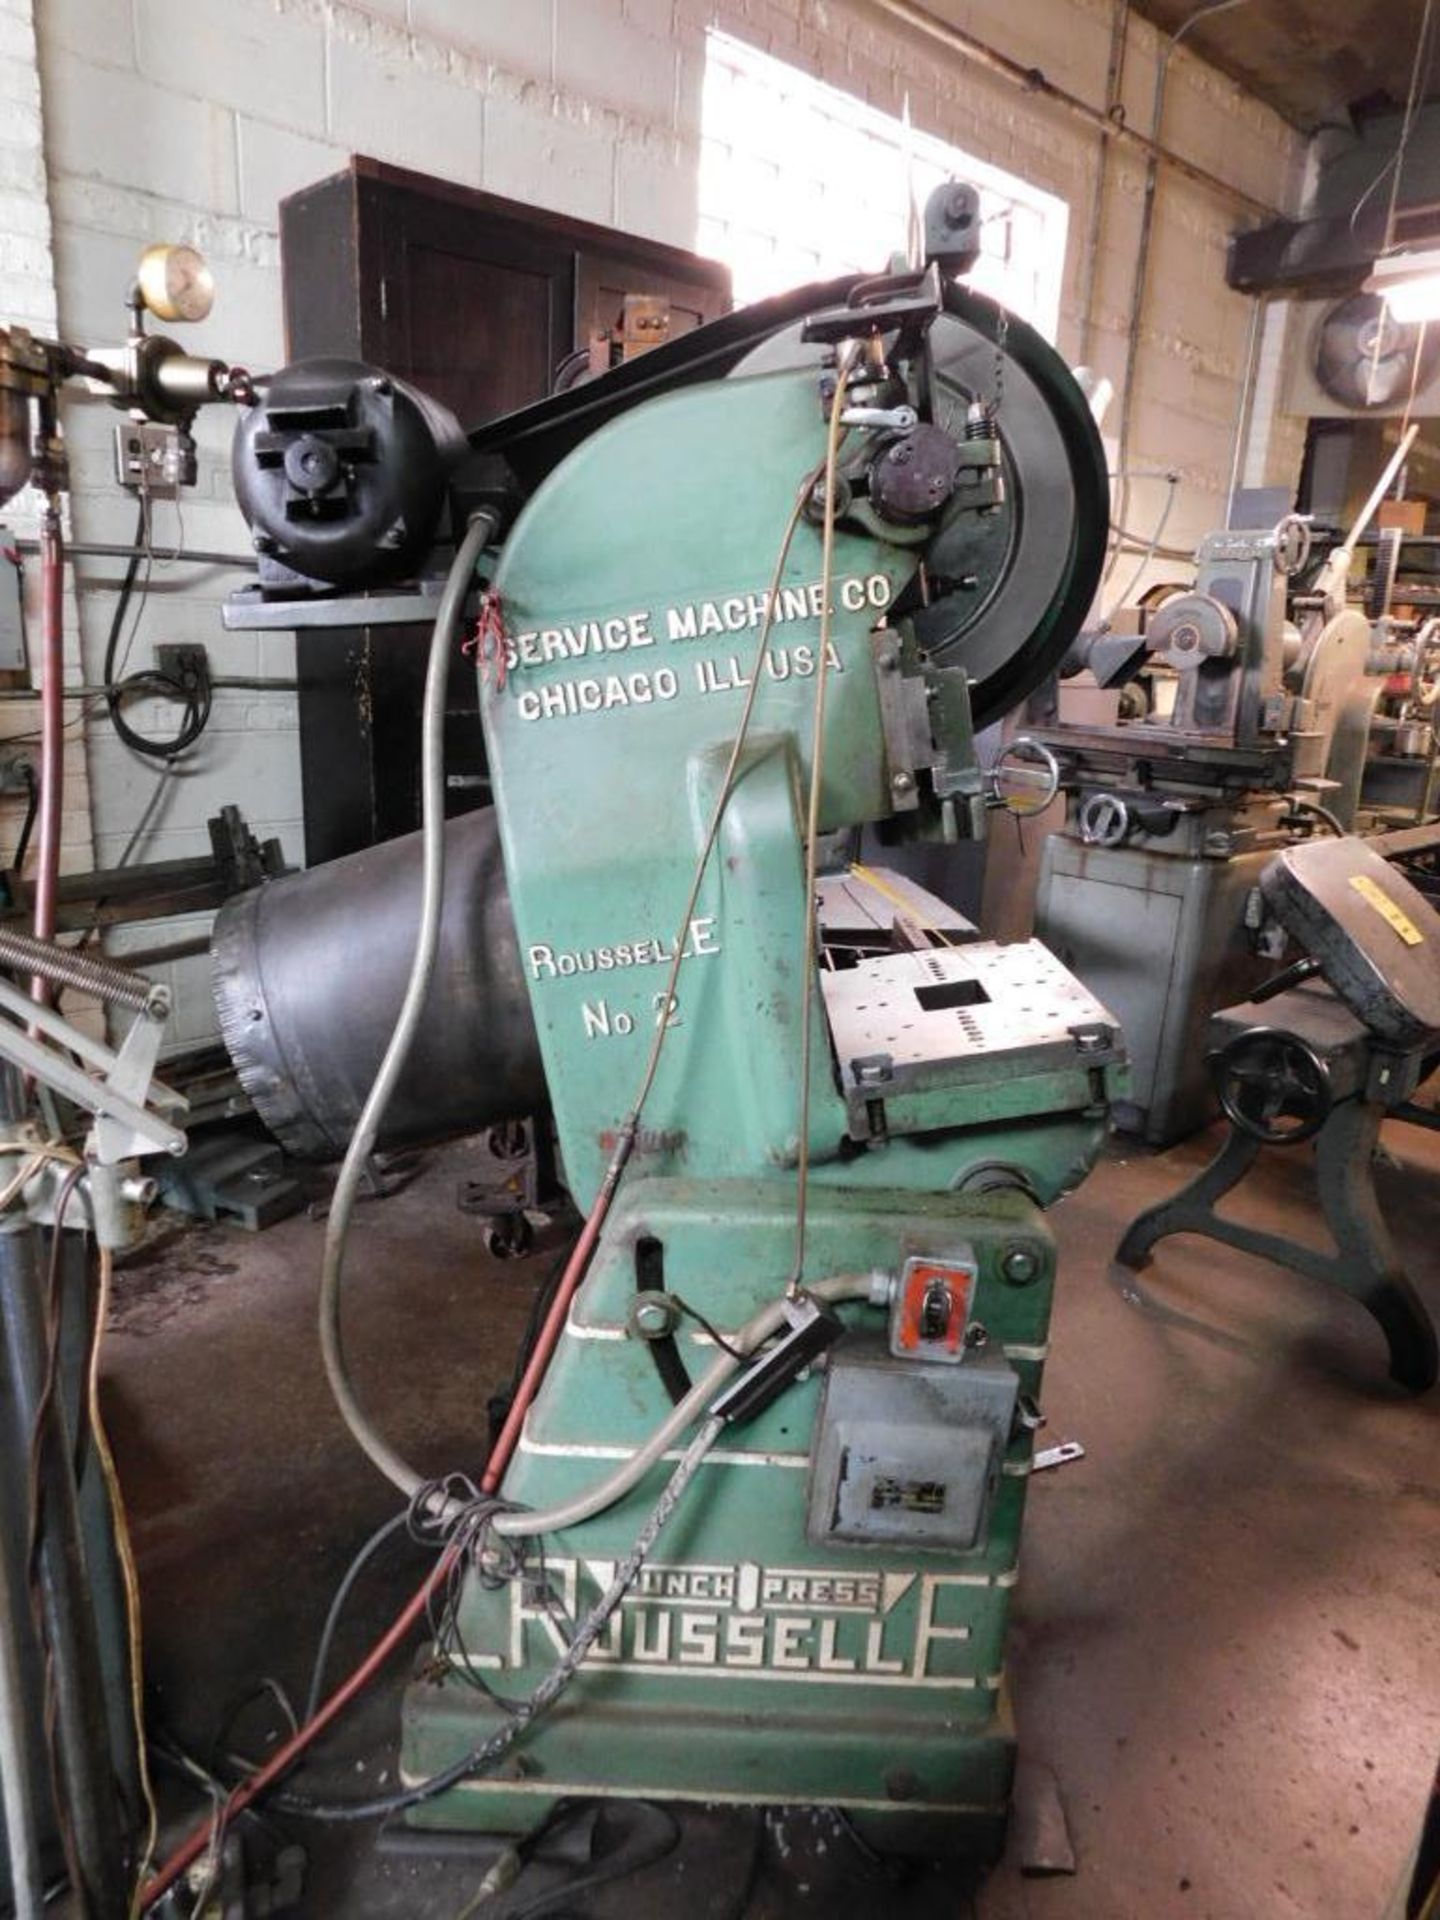 Rousselle No. 2 15-Ton OBI Air Clutch Punch Press. 2" Stroke, 6.75" Shut Height, 16"x11" Bolster Pla - Image 3 of 10